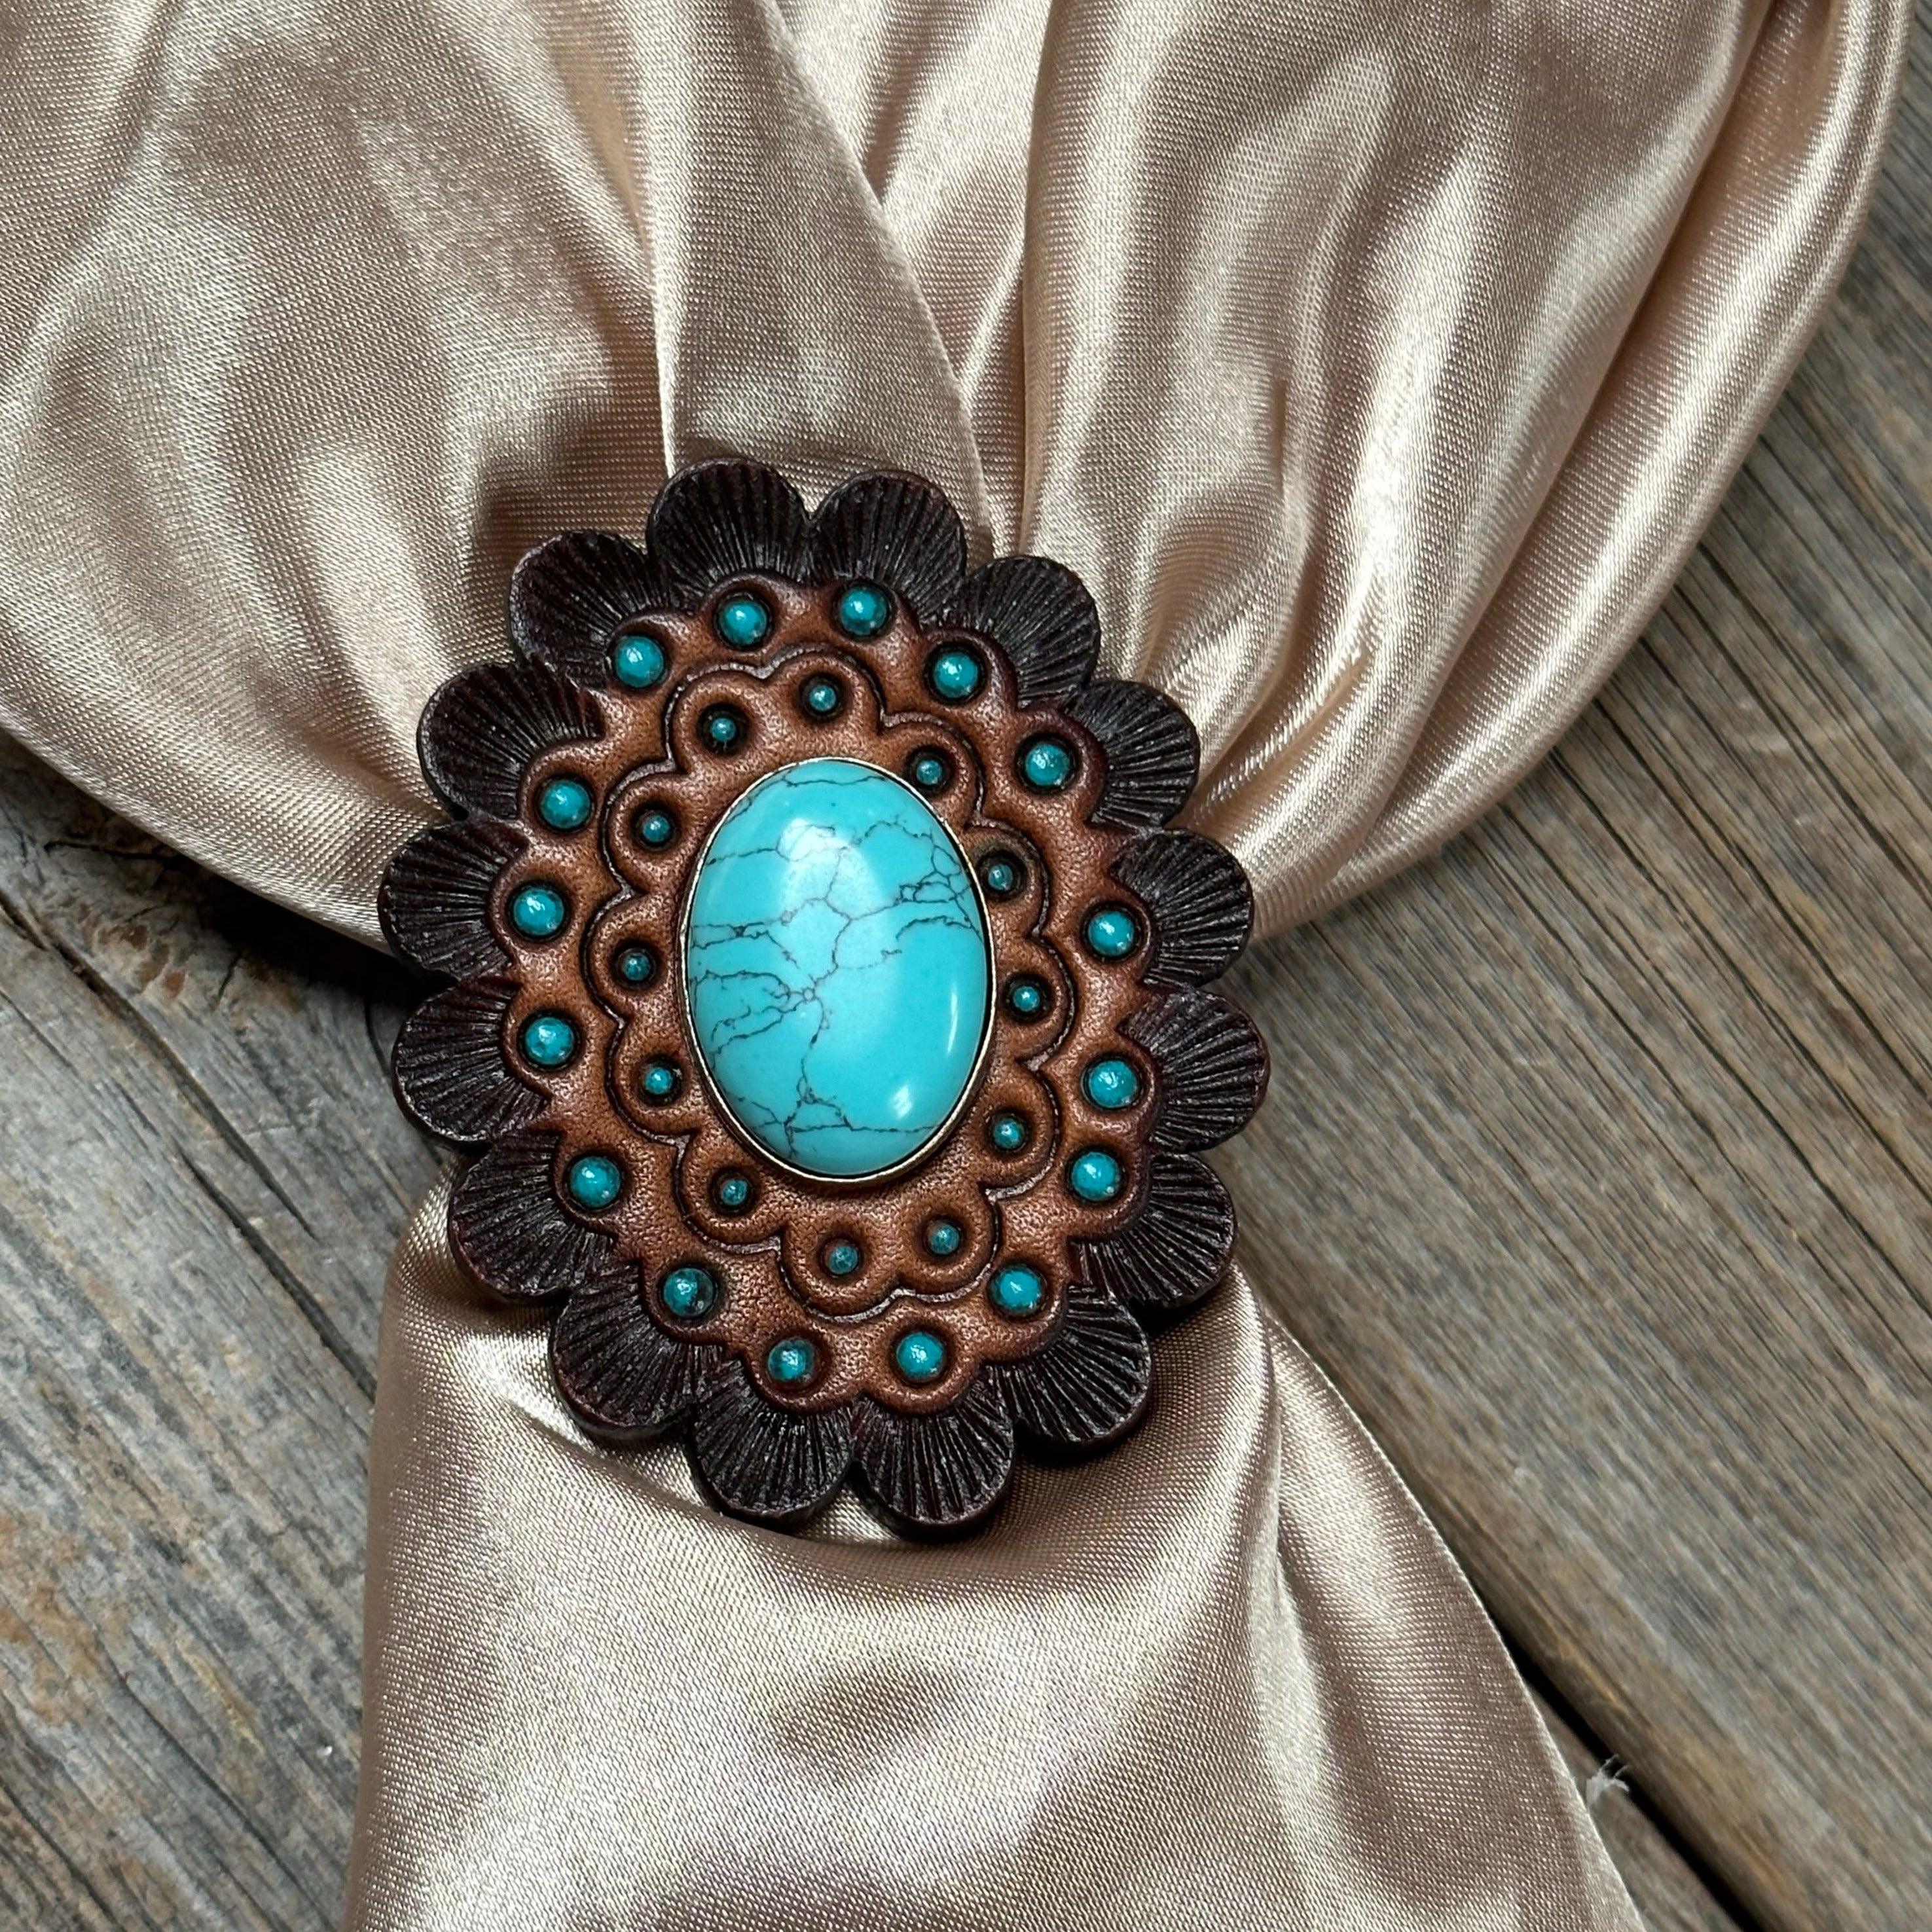 Leather Rosette with Turquoise Cabochon Wild Rag Slide #WRSR104TQ - RODEO DRIVE